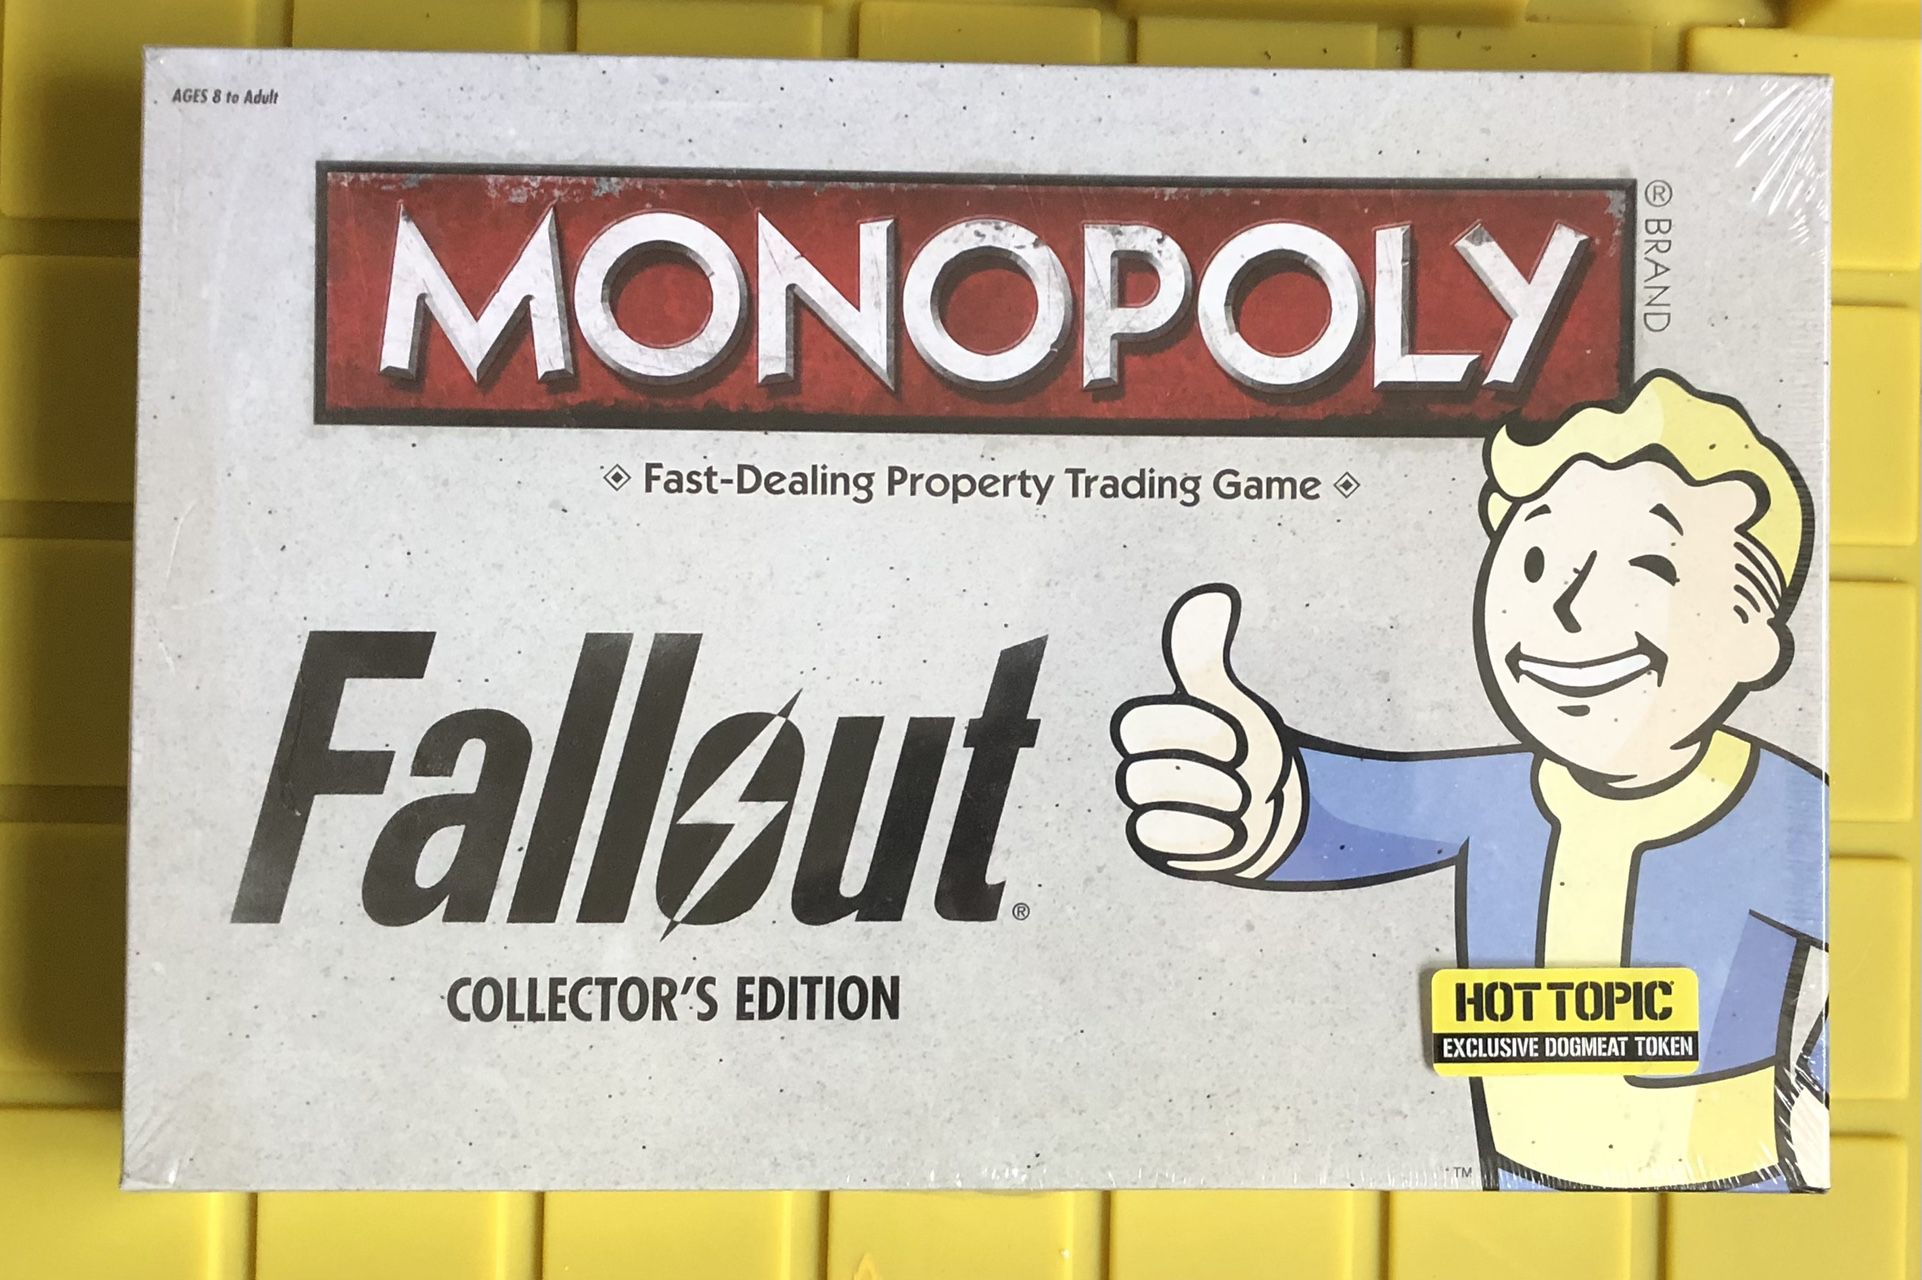 Fallout Monopoly & Operation Board Games New Sealed